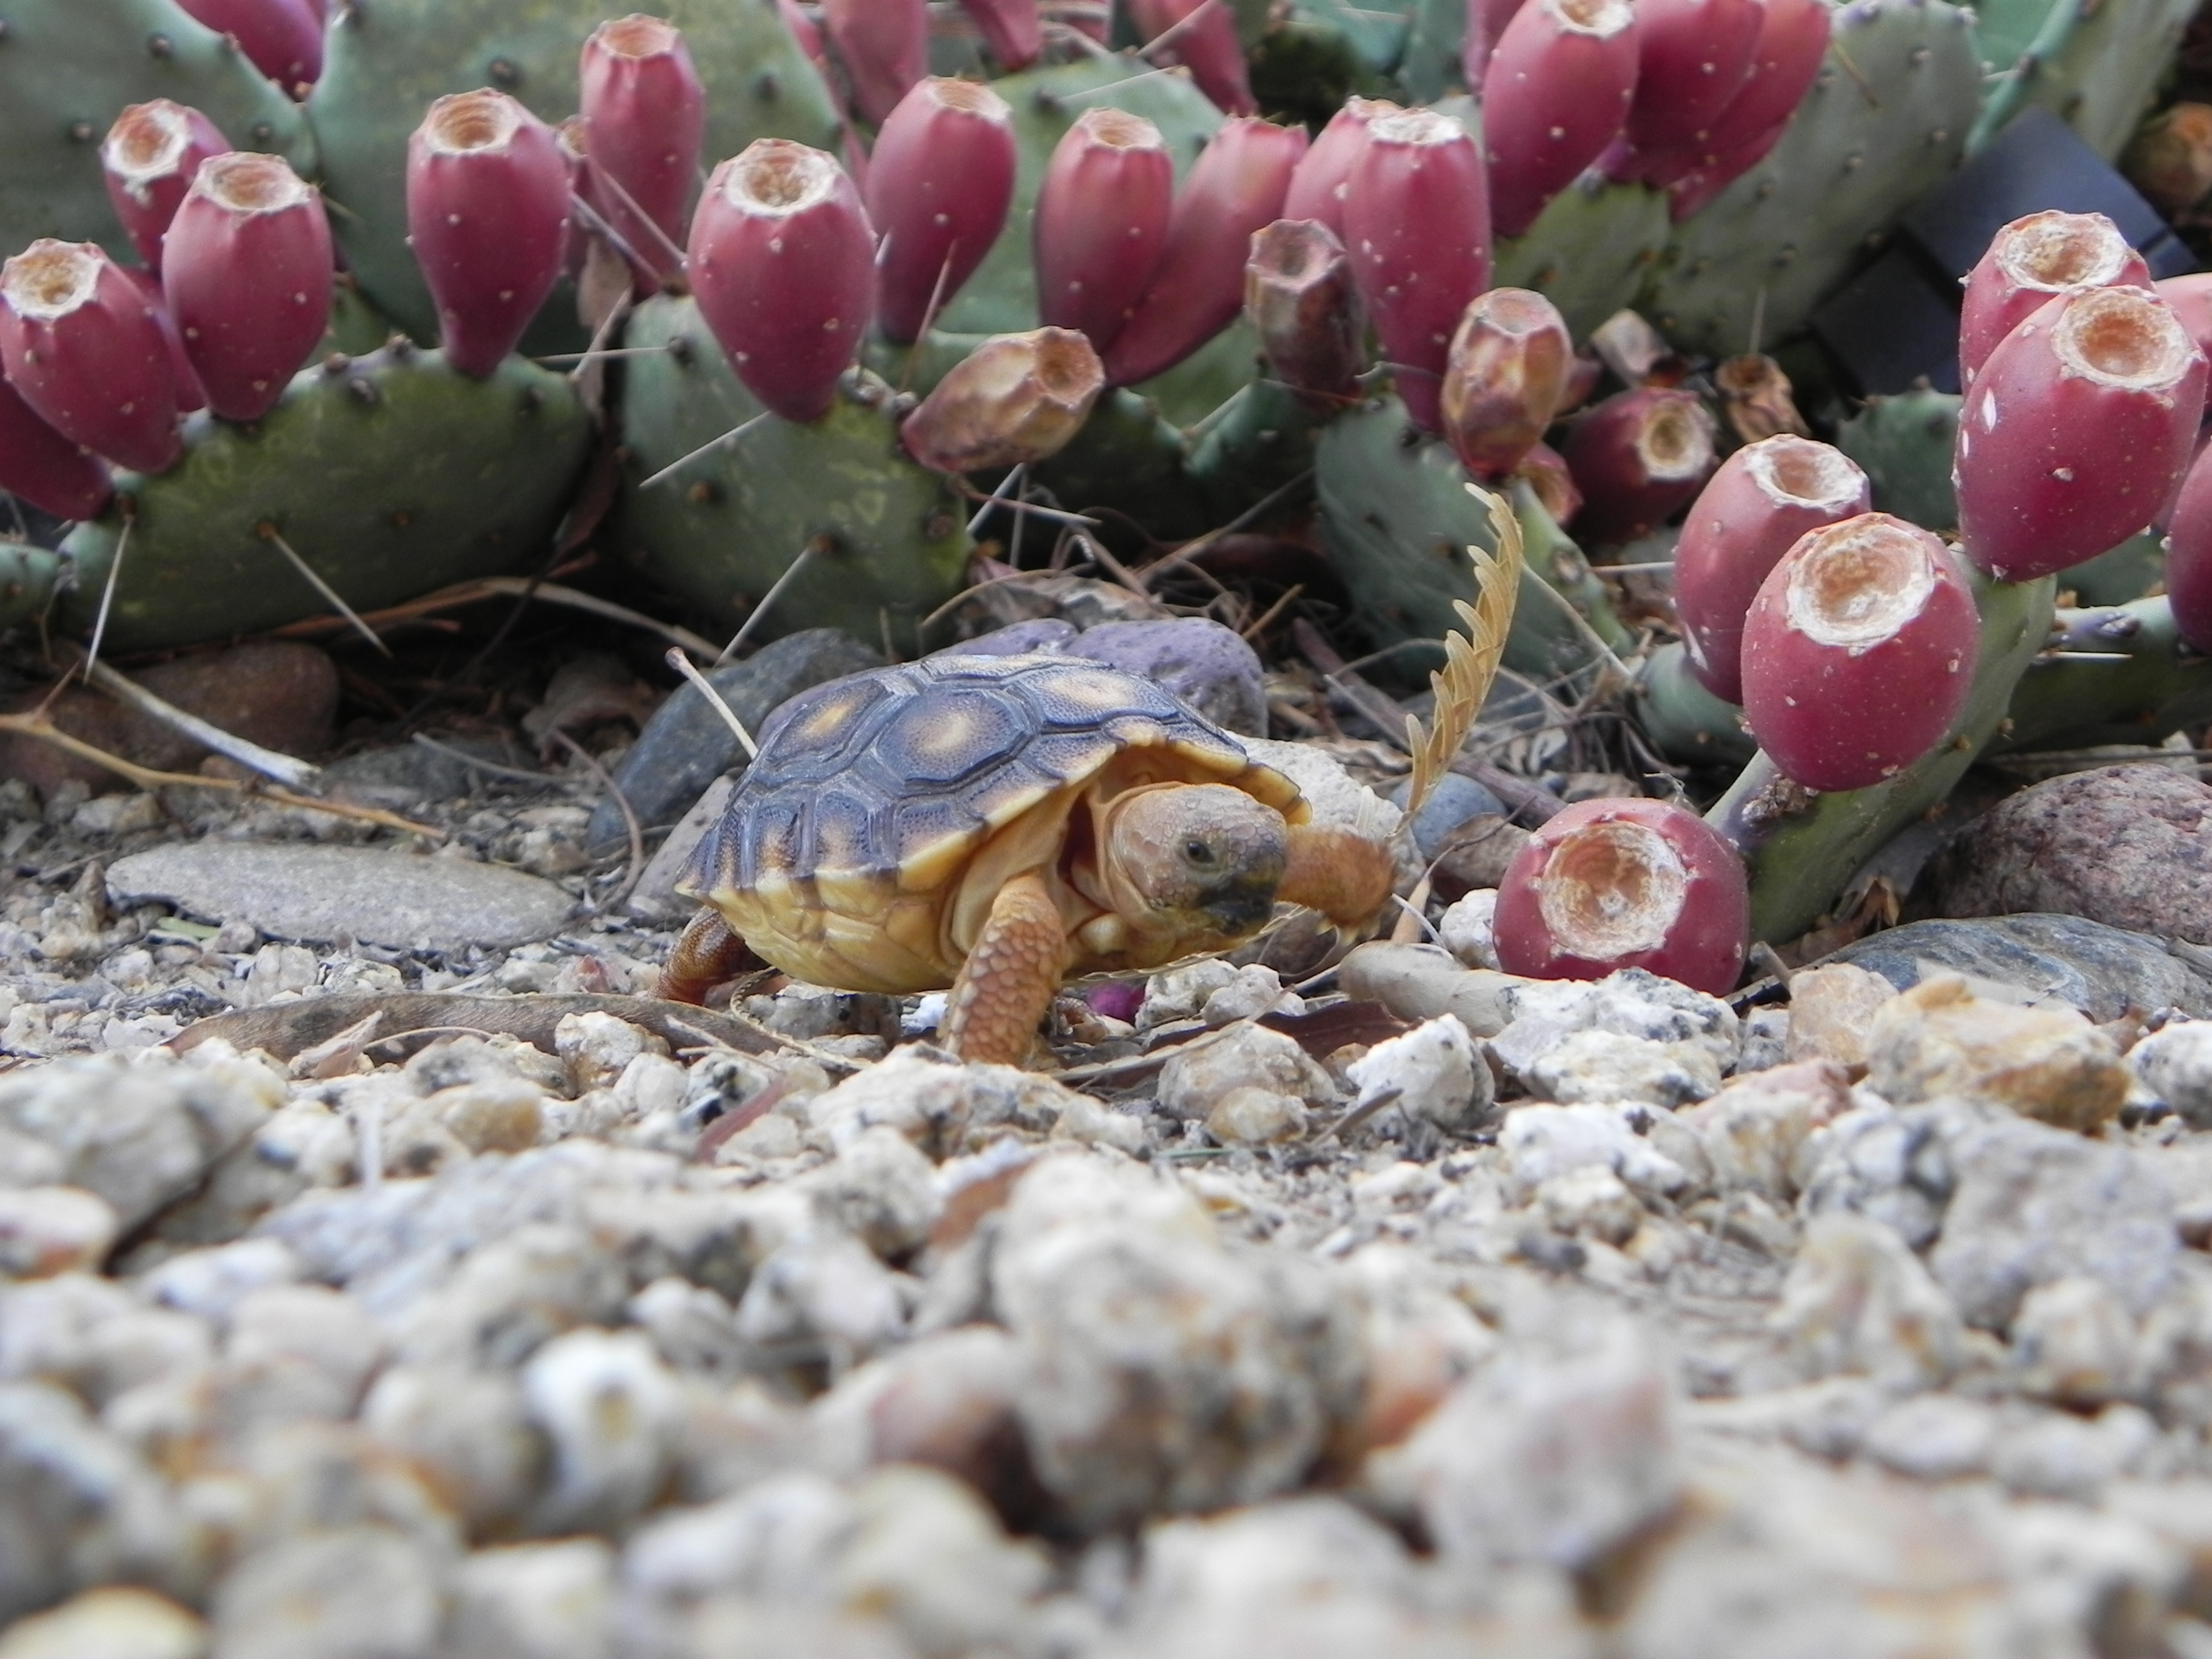 Young tortoise with prickly pear cactus in the background.